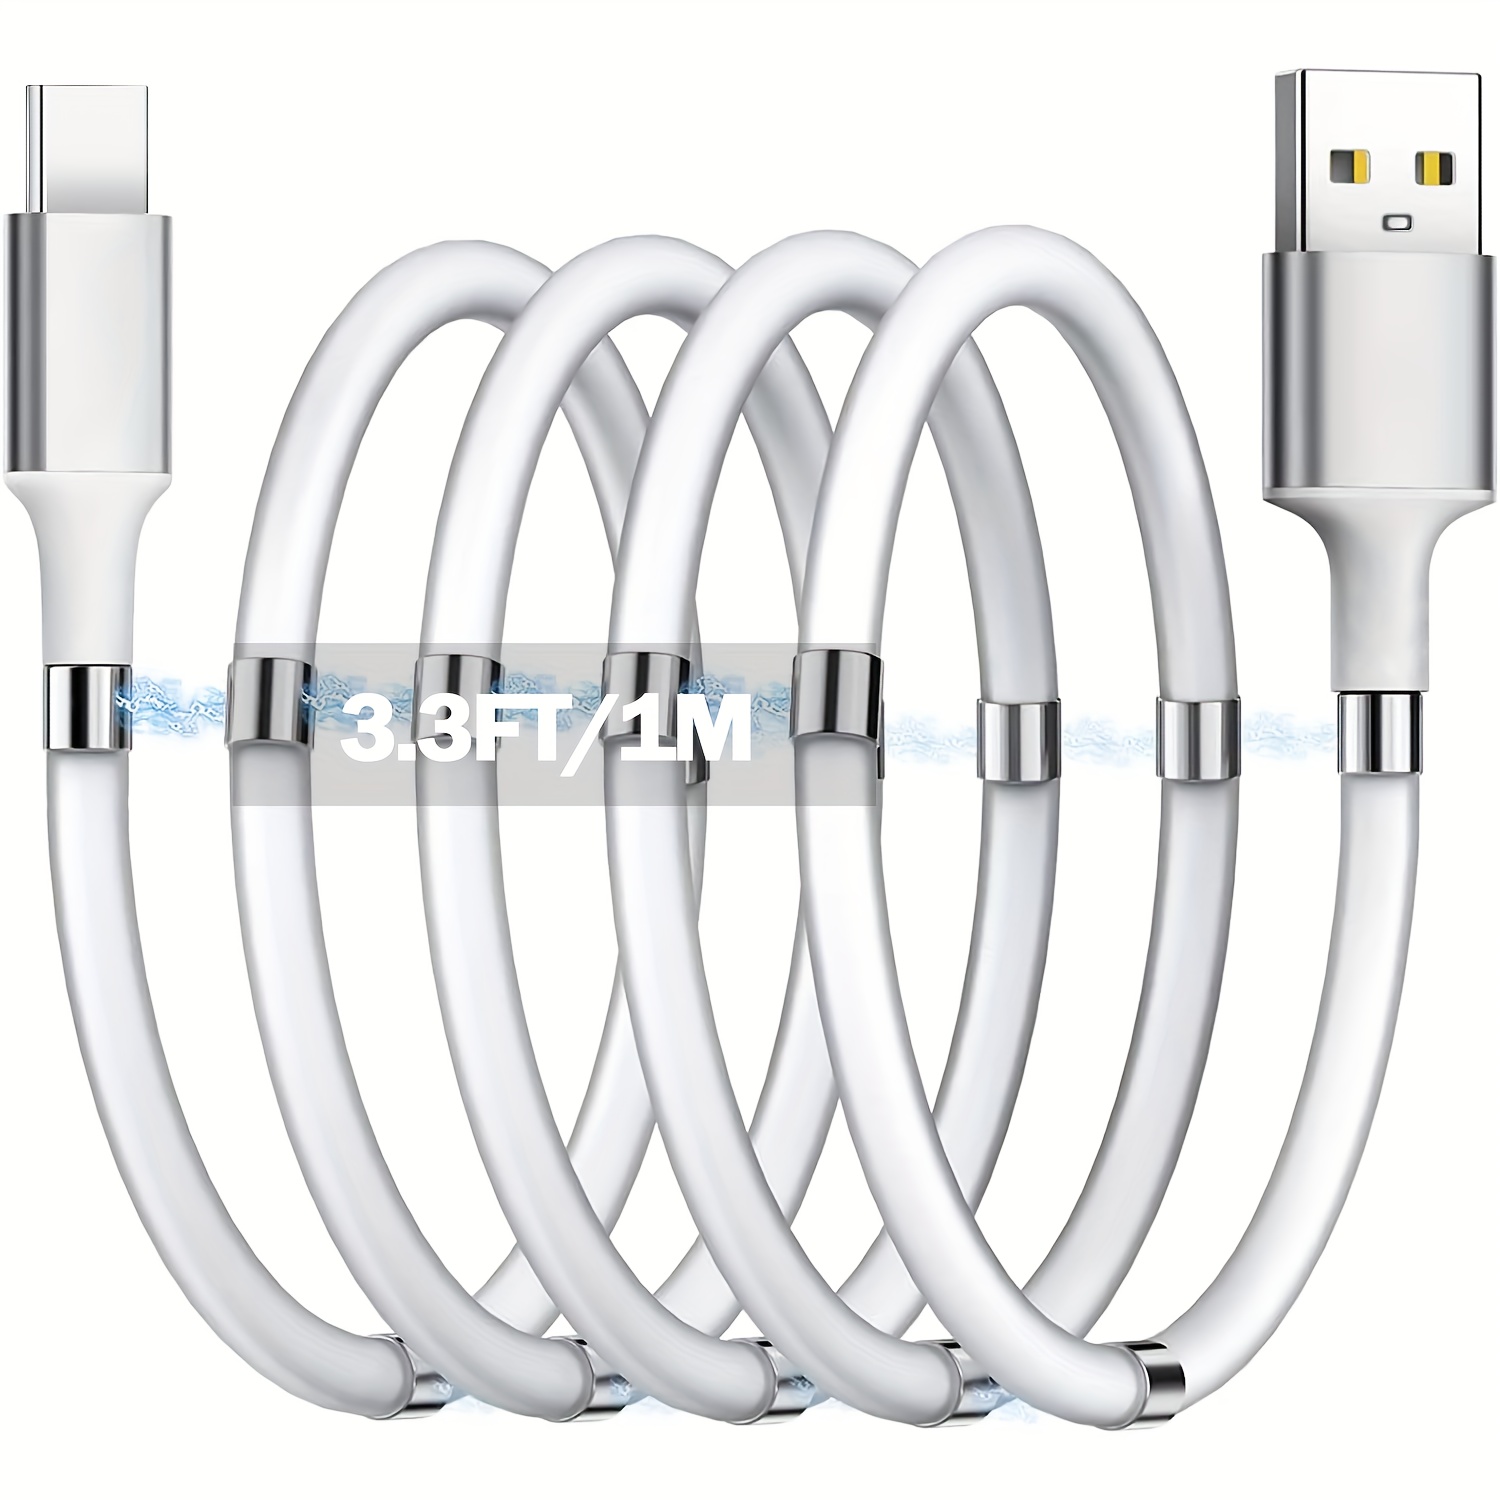 Why switch to Magnetic Charging Cables? –